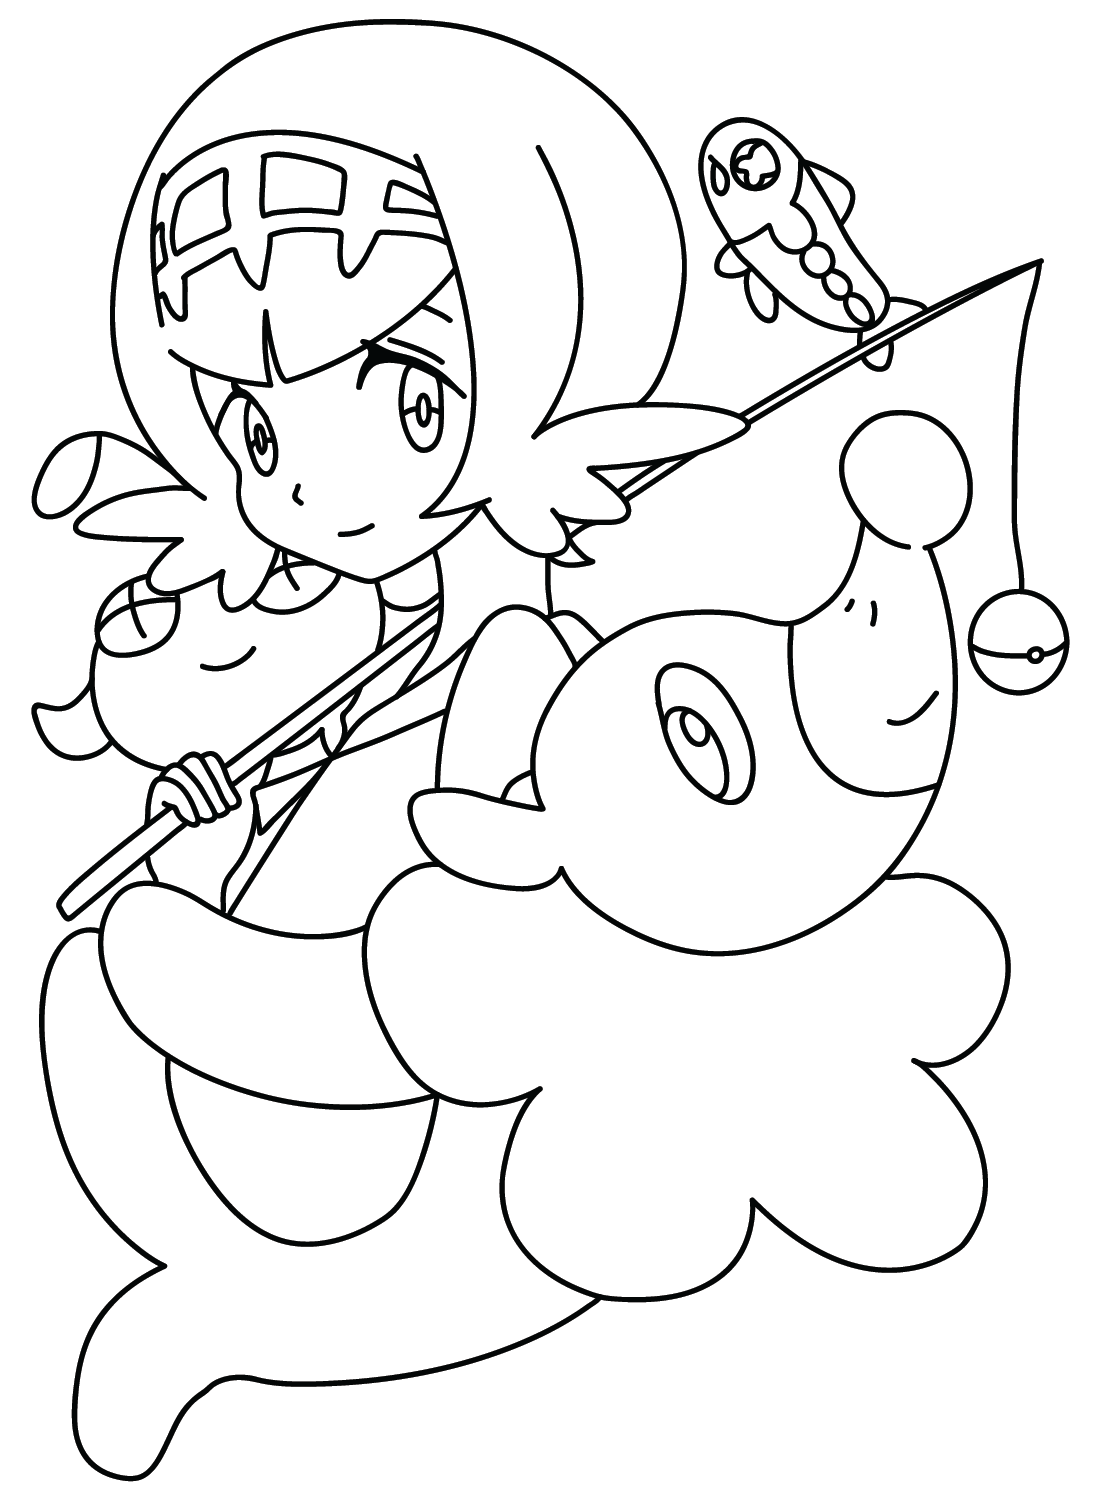 Images Lana Pokemon to Color from Lana Pokemon